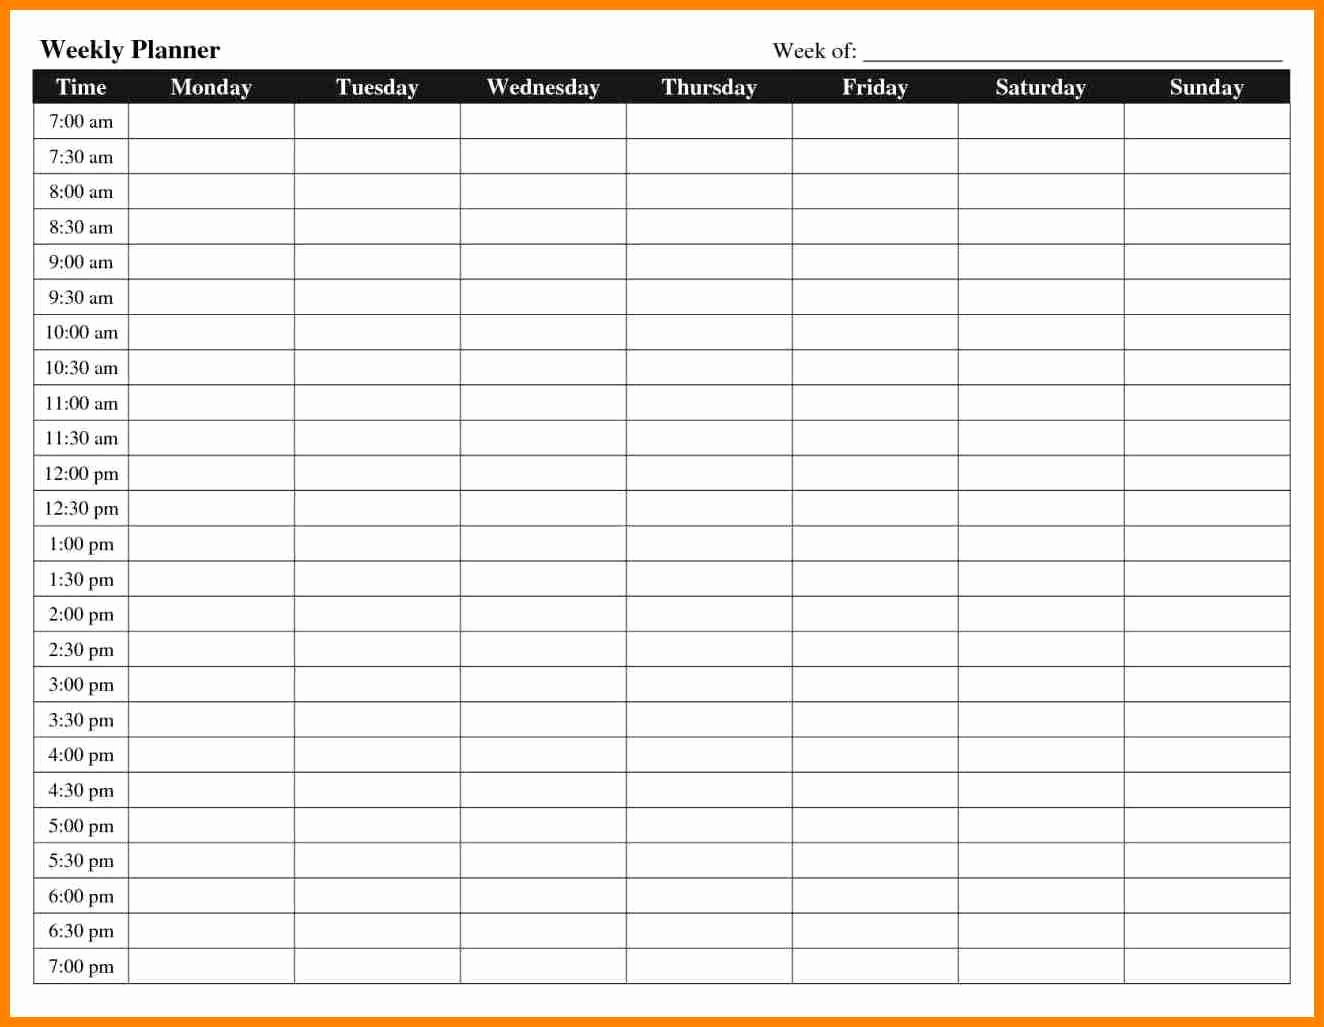 Daily Hourly Schedule Template Awesome Free 5 Daily Weekly Hourly Schedule Template Printable